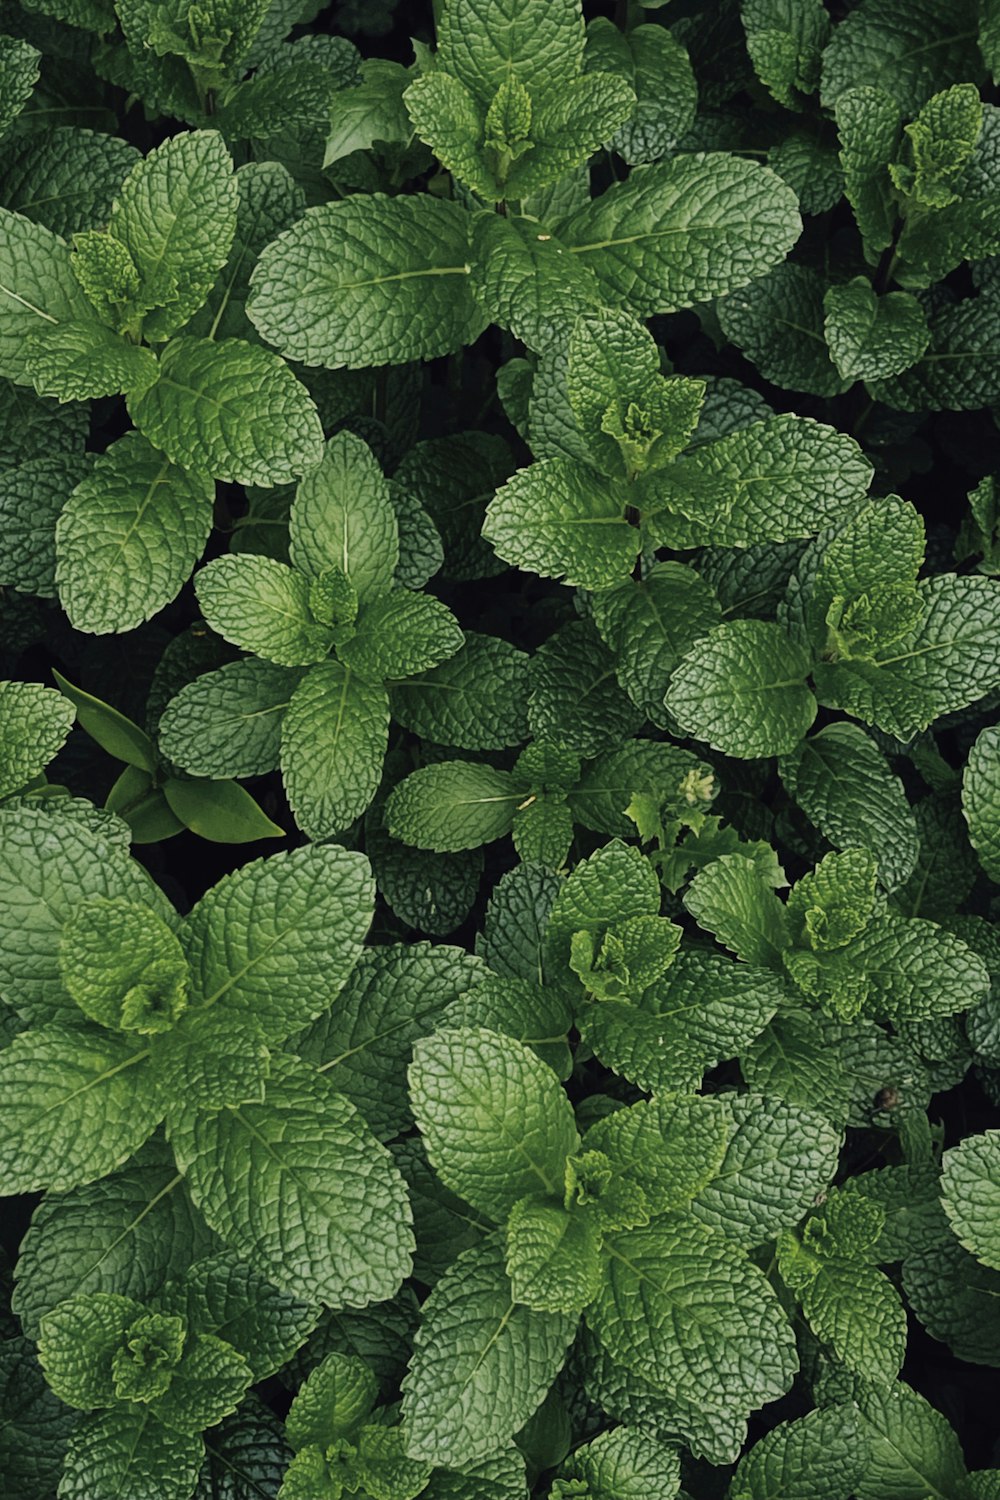 Mint Leaves Pictures  Download Free Images on Unsplash